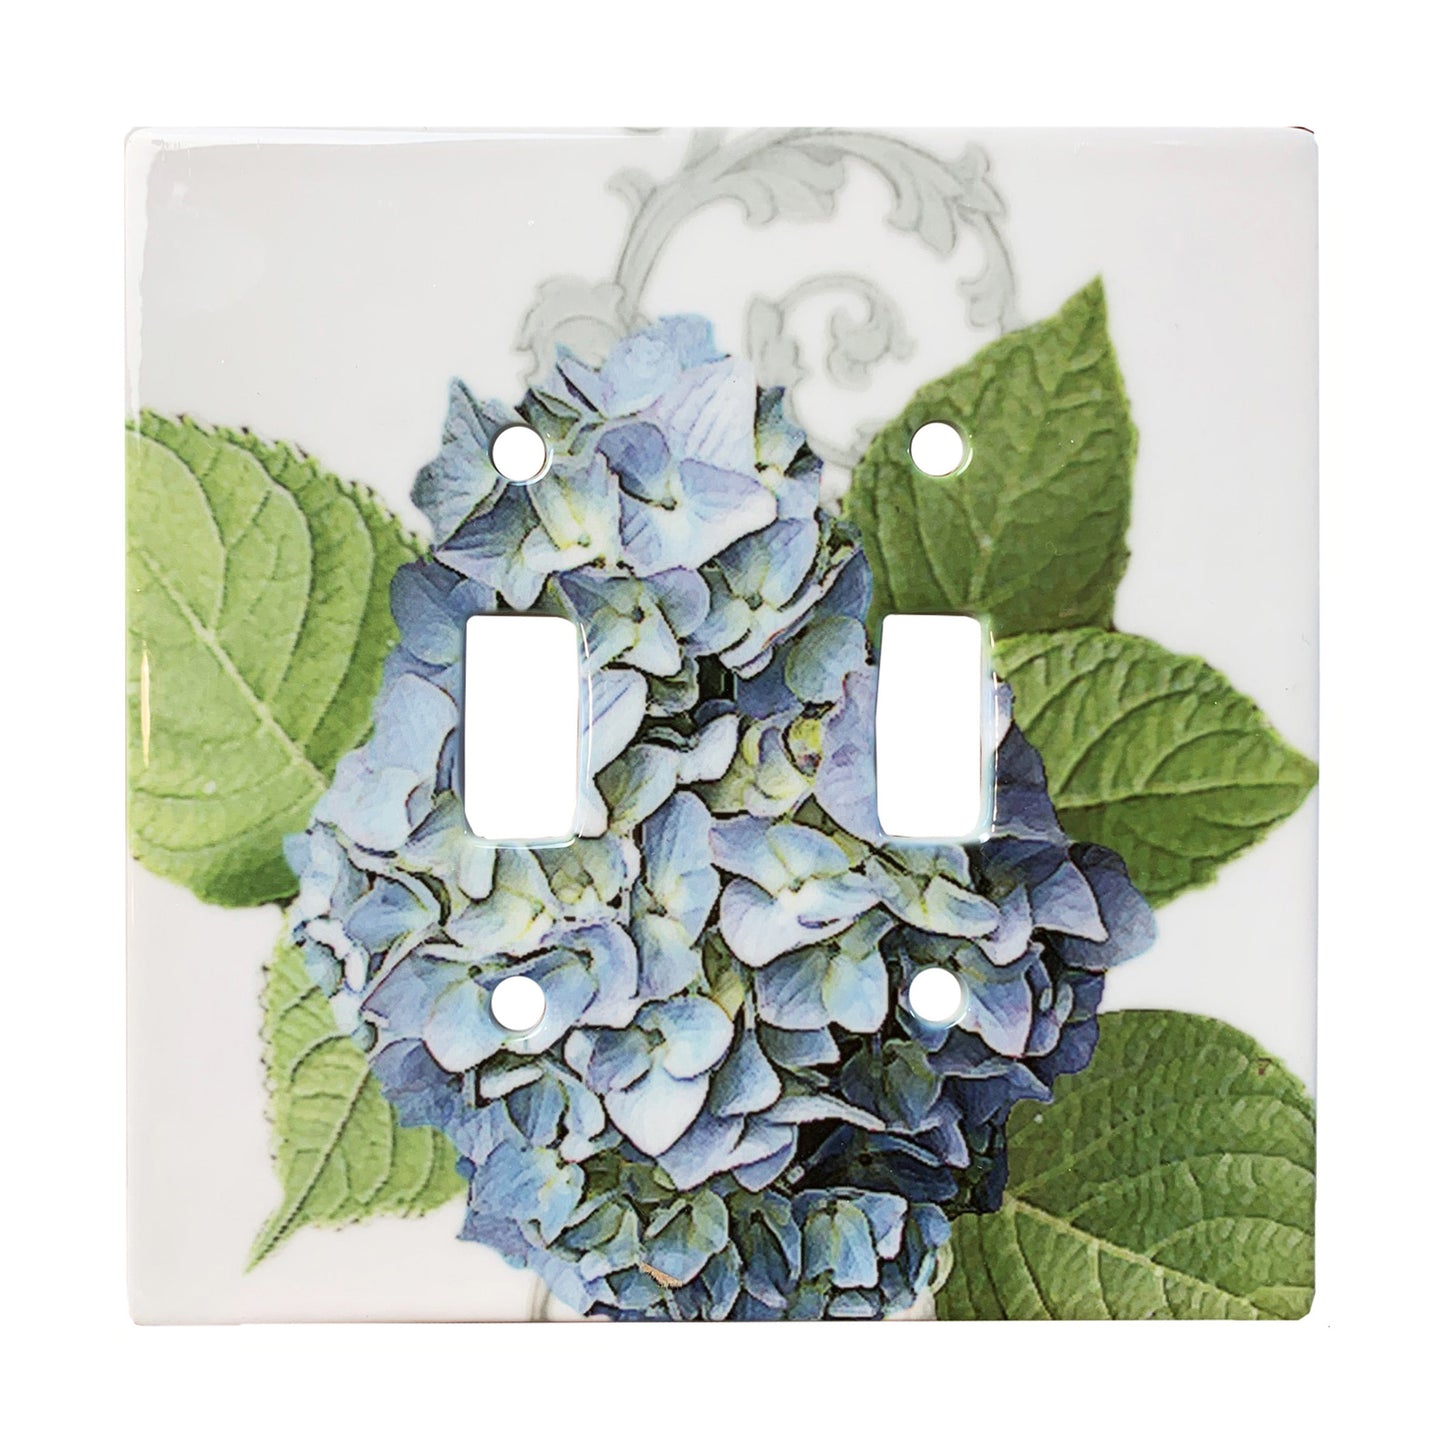 ceramic double toggle switchplate featuring blue hydrangeas.